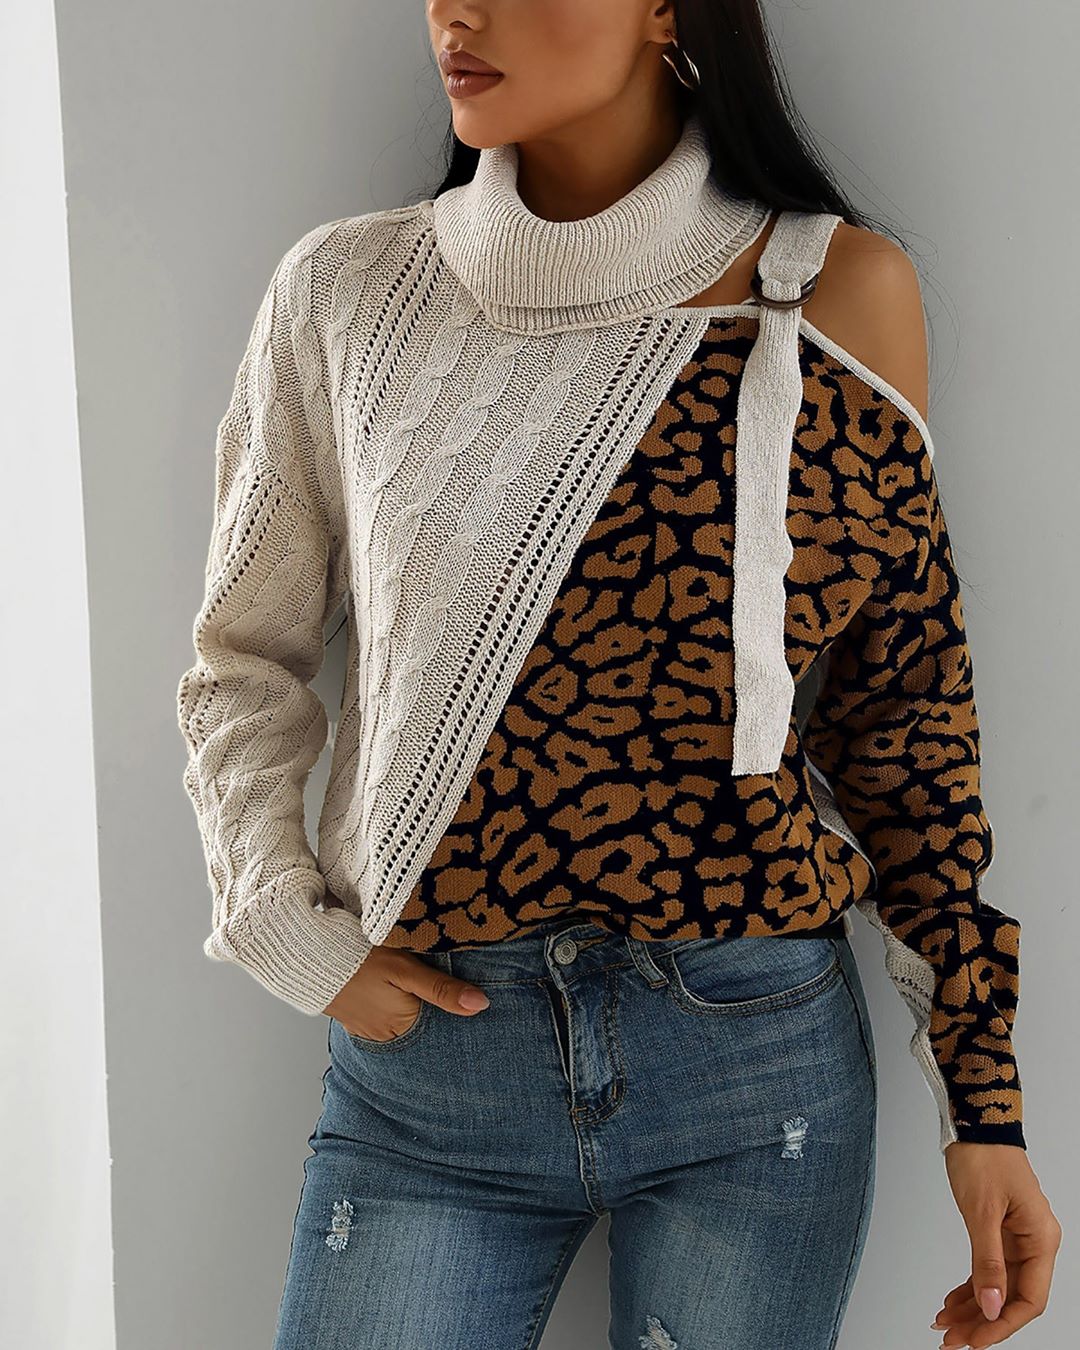 ivroseofficial - #linkinbio When leopard print climbs on your sweater..⁠
🔍"ACC1831"⁠
Shop: IVROSE.com⁠
⁠
#ivroseofficial #fashion #style #ootd #outfitgoals #ootdshare #sale